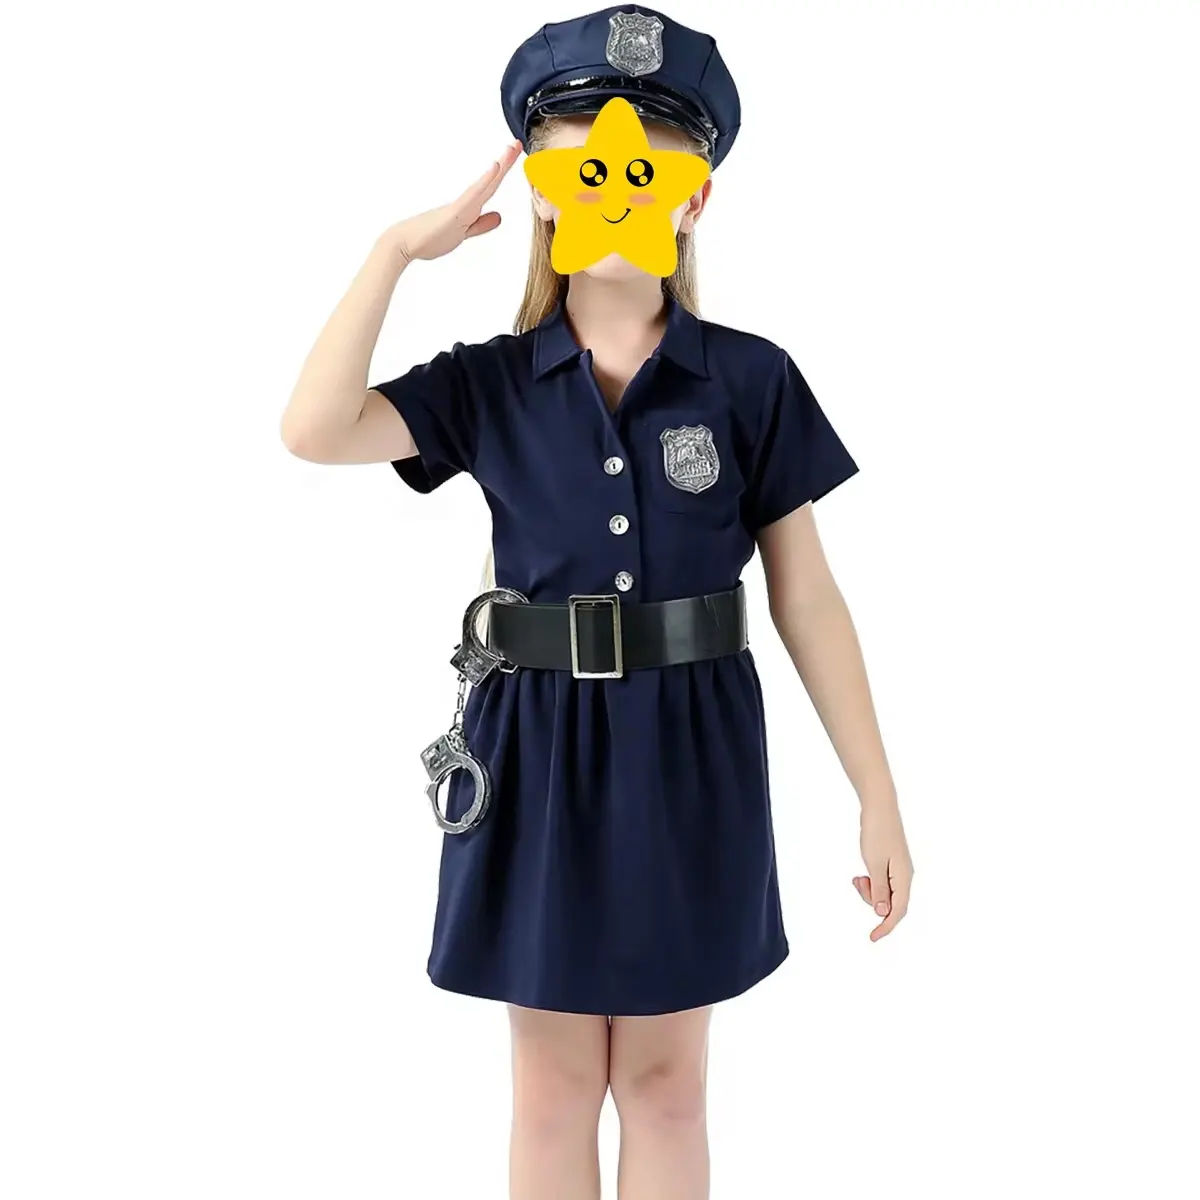 Kids Police Officer Costume Kids Cop Outfit for Halloween Role Play Dress Up